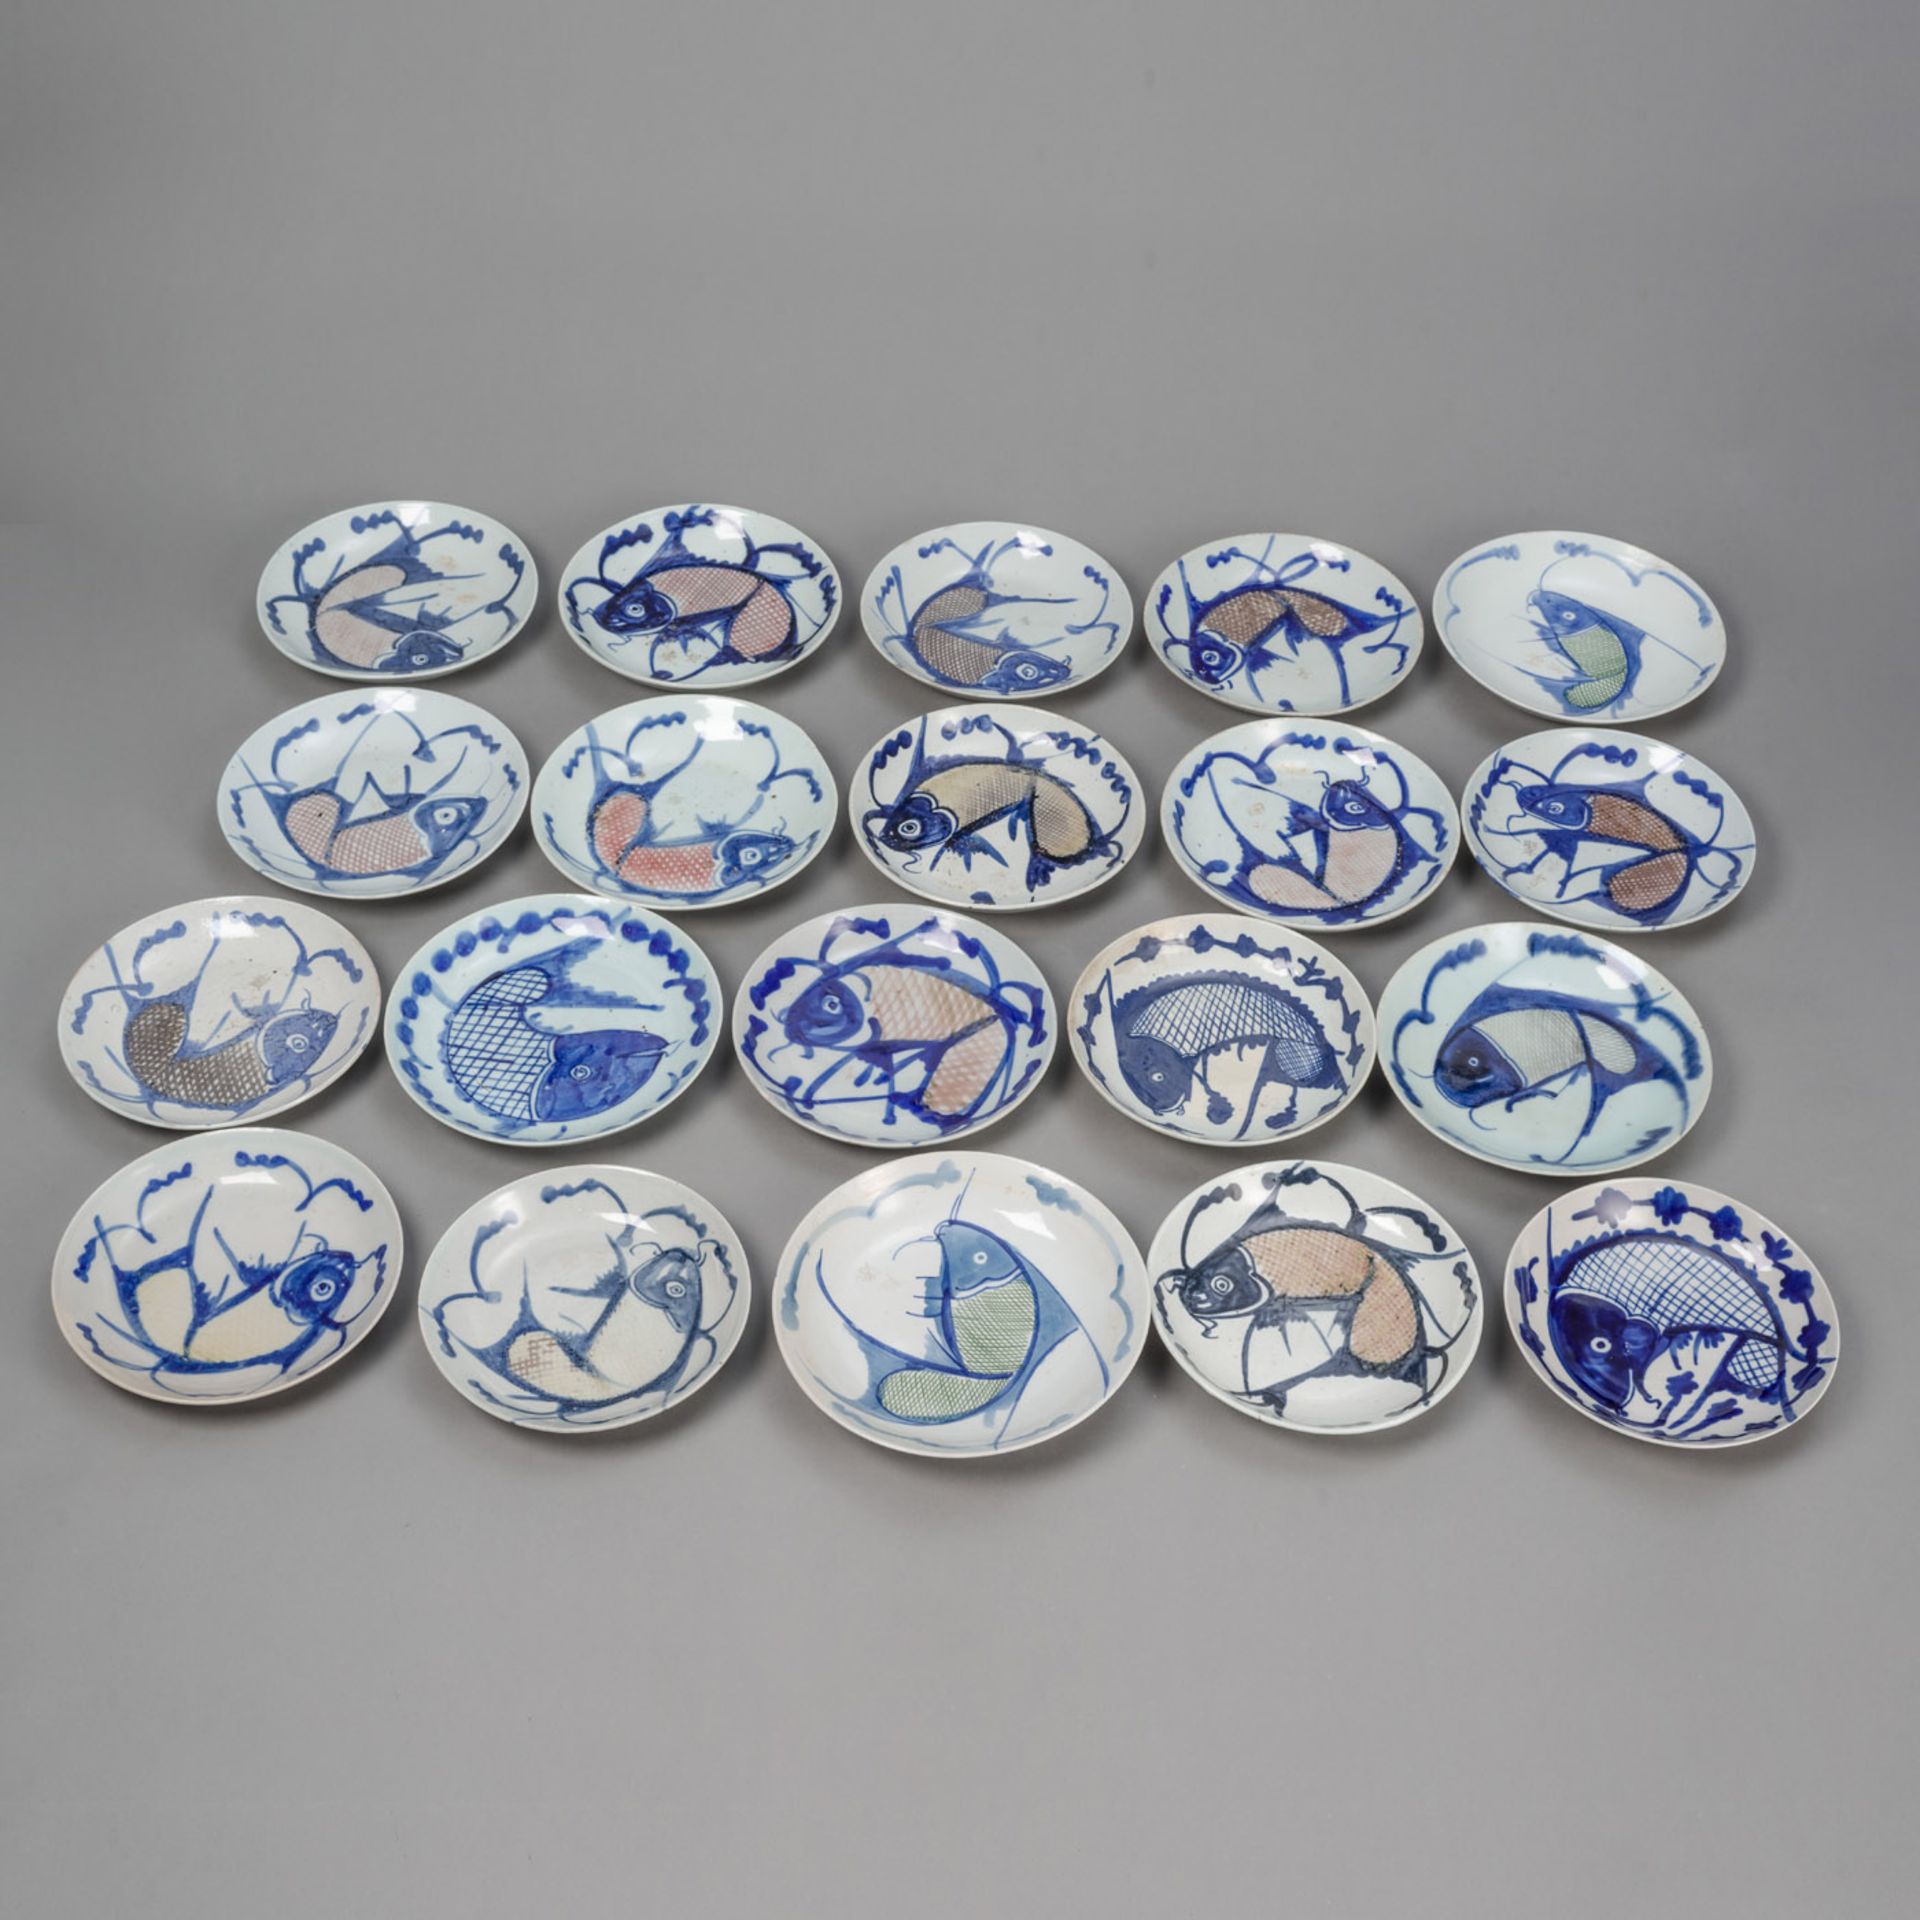 A GROUP OF 20 PORCELAIN FISH DISHES